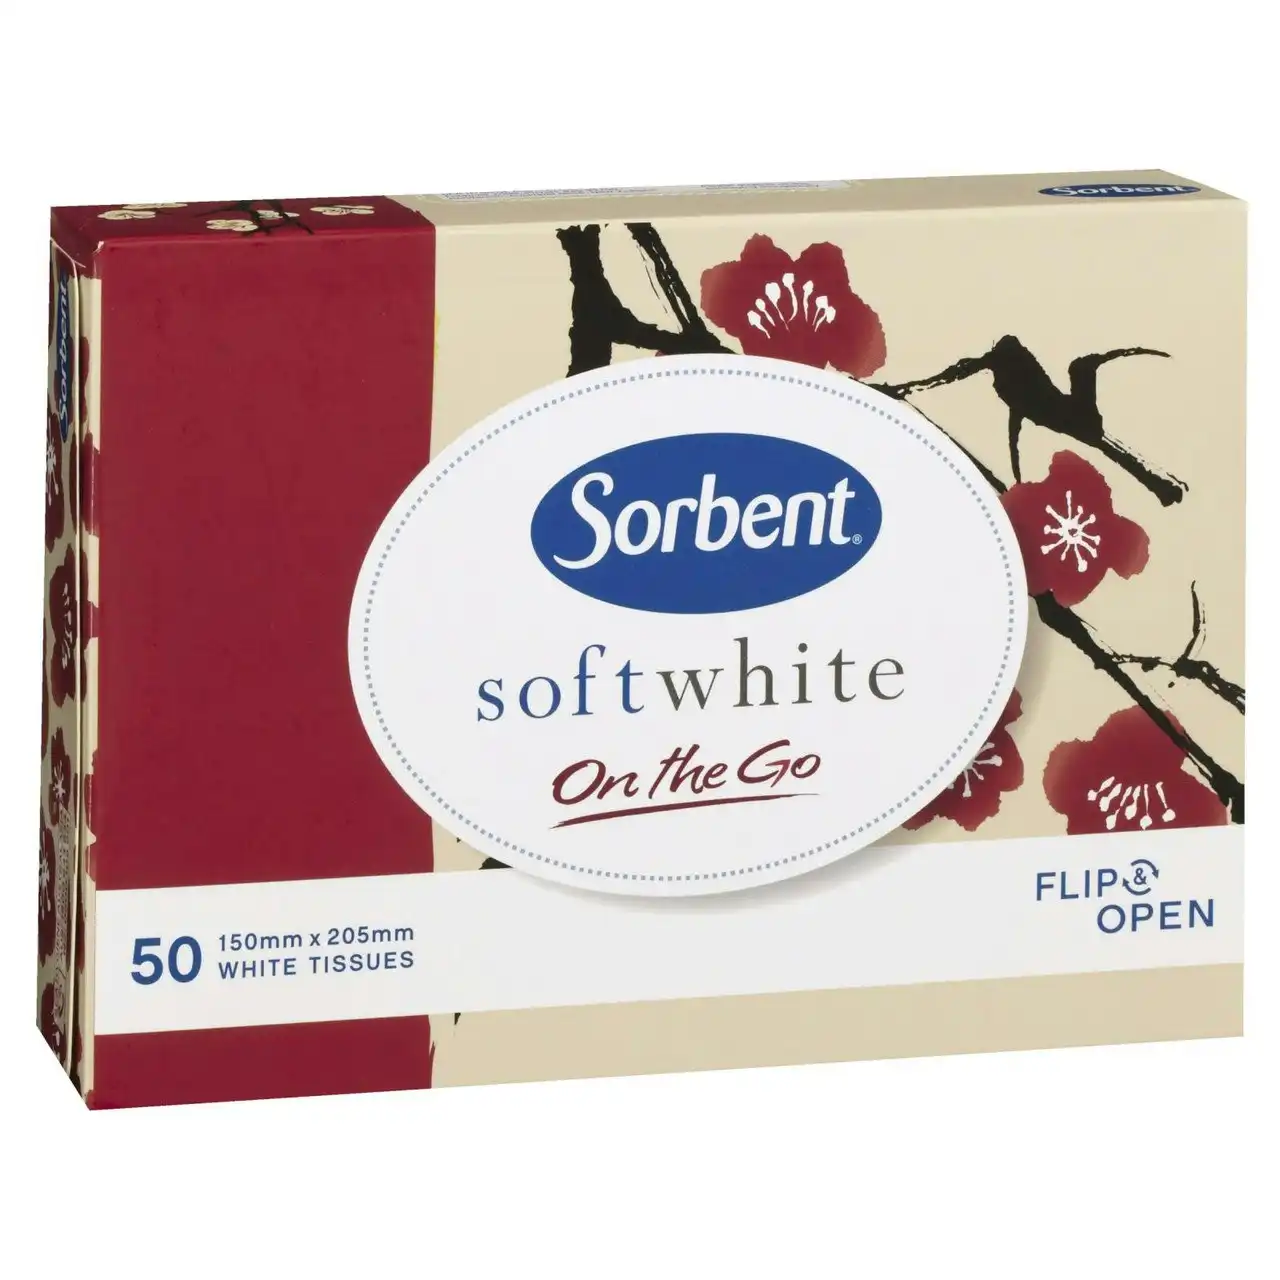 Sorbent Soft White On the Go Facial Tissues 50s